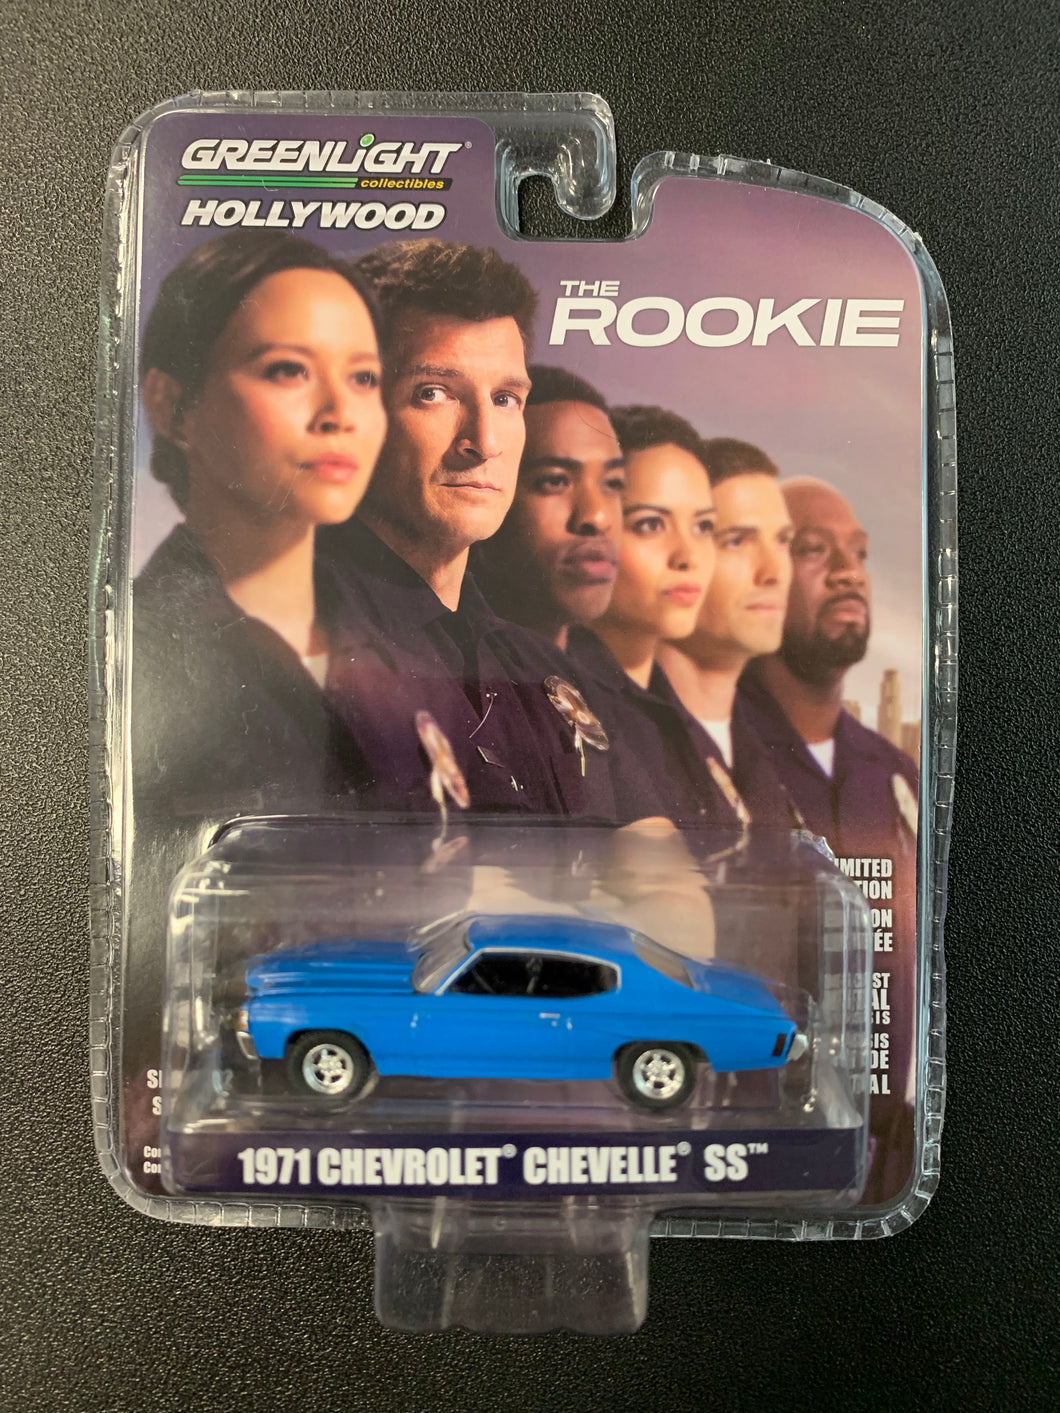 GREENLIGHT HOLLYWOOD THE ROOKIE 1971 CHEVROLET CHEVELLE SS